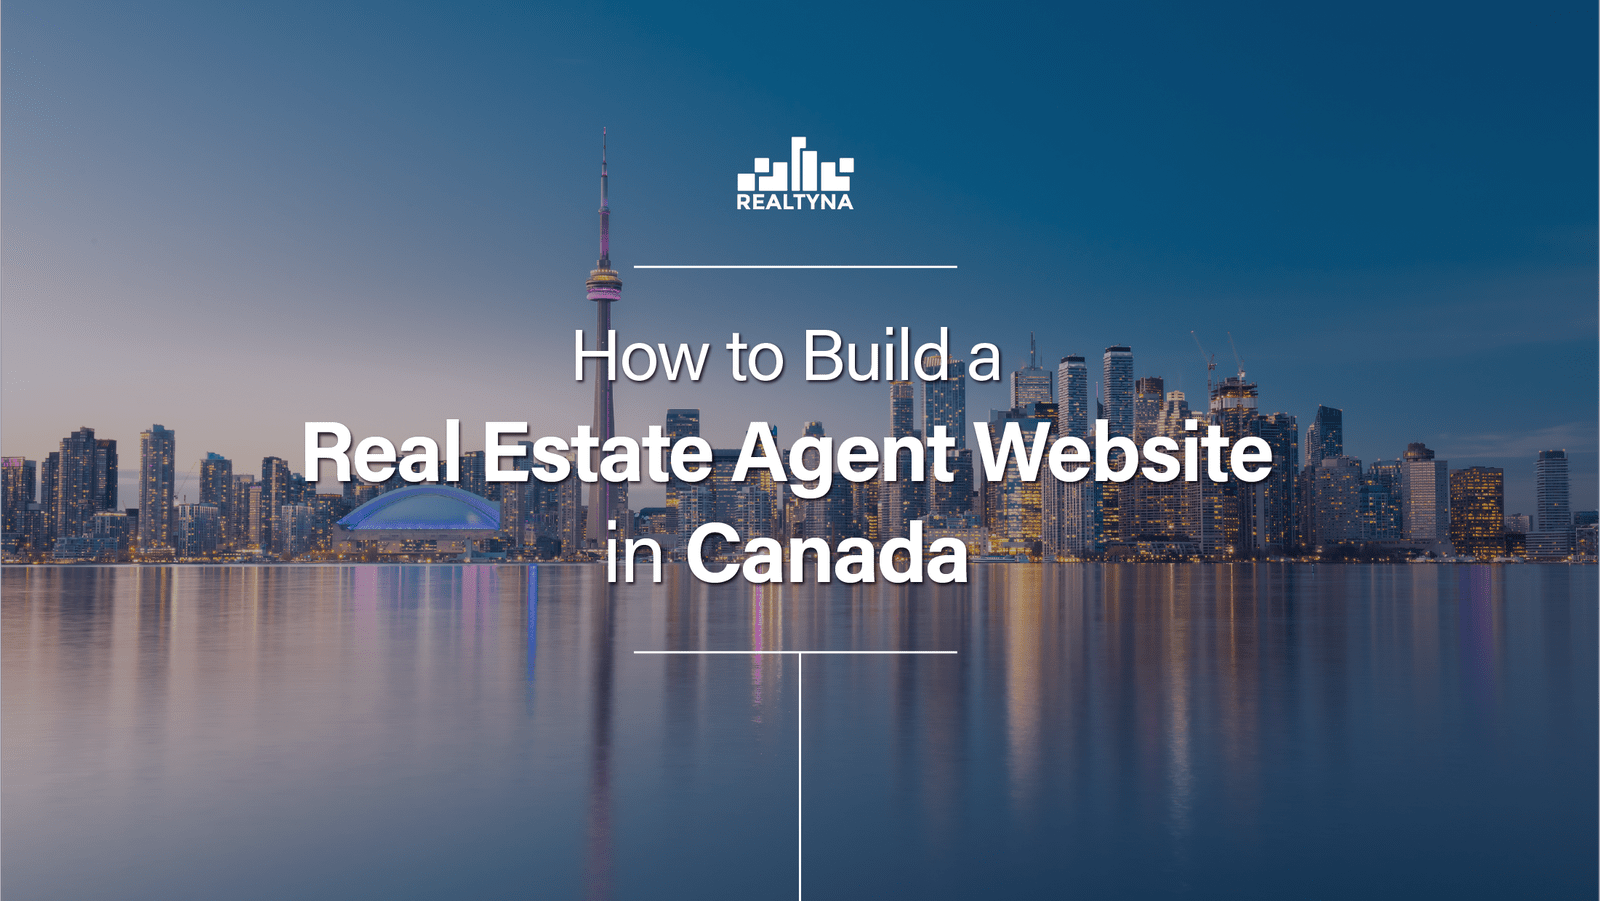 How To Build a Real Estate Agent Website in Canada